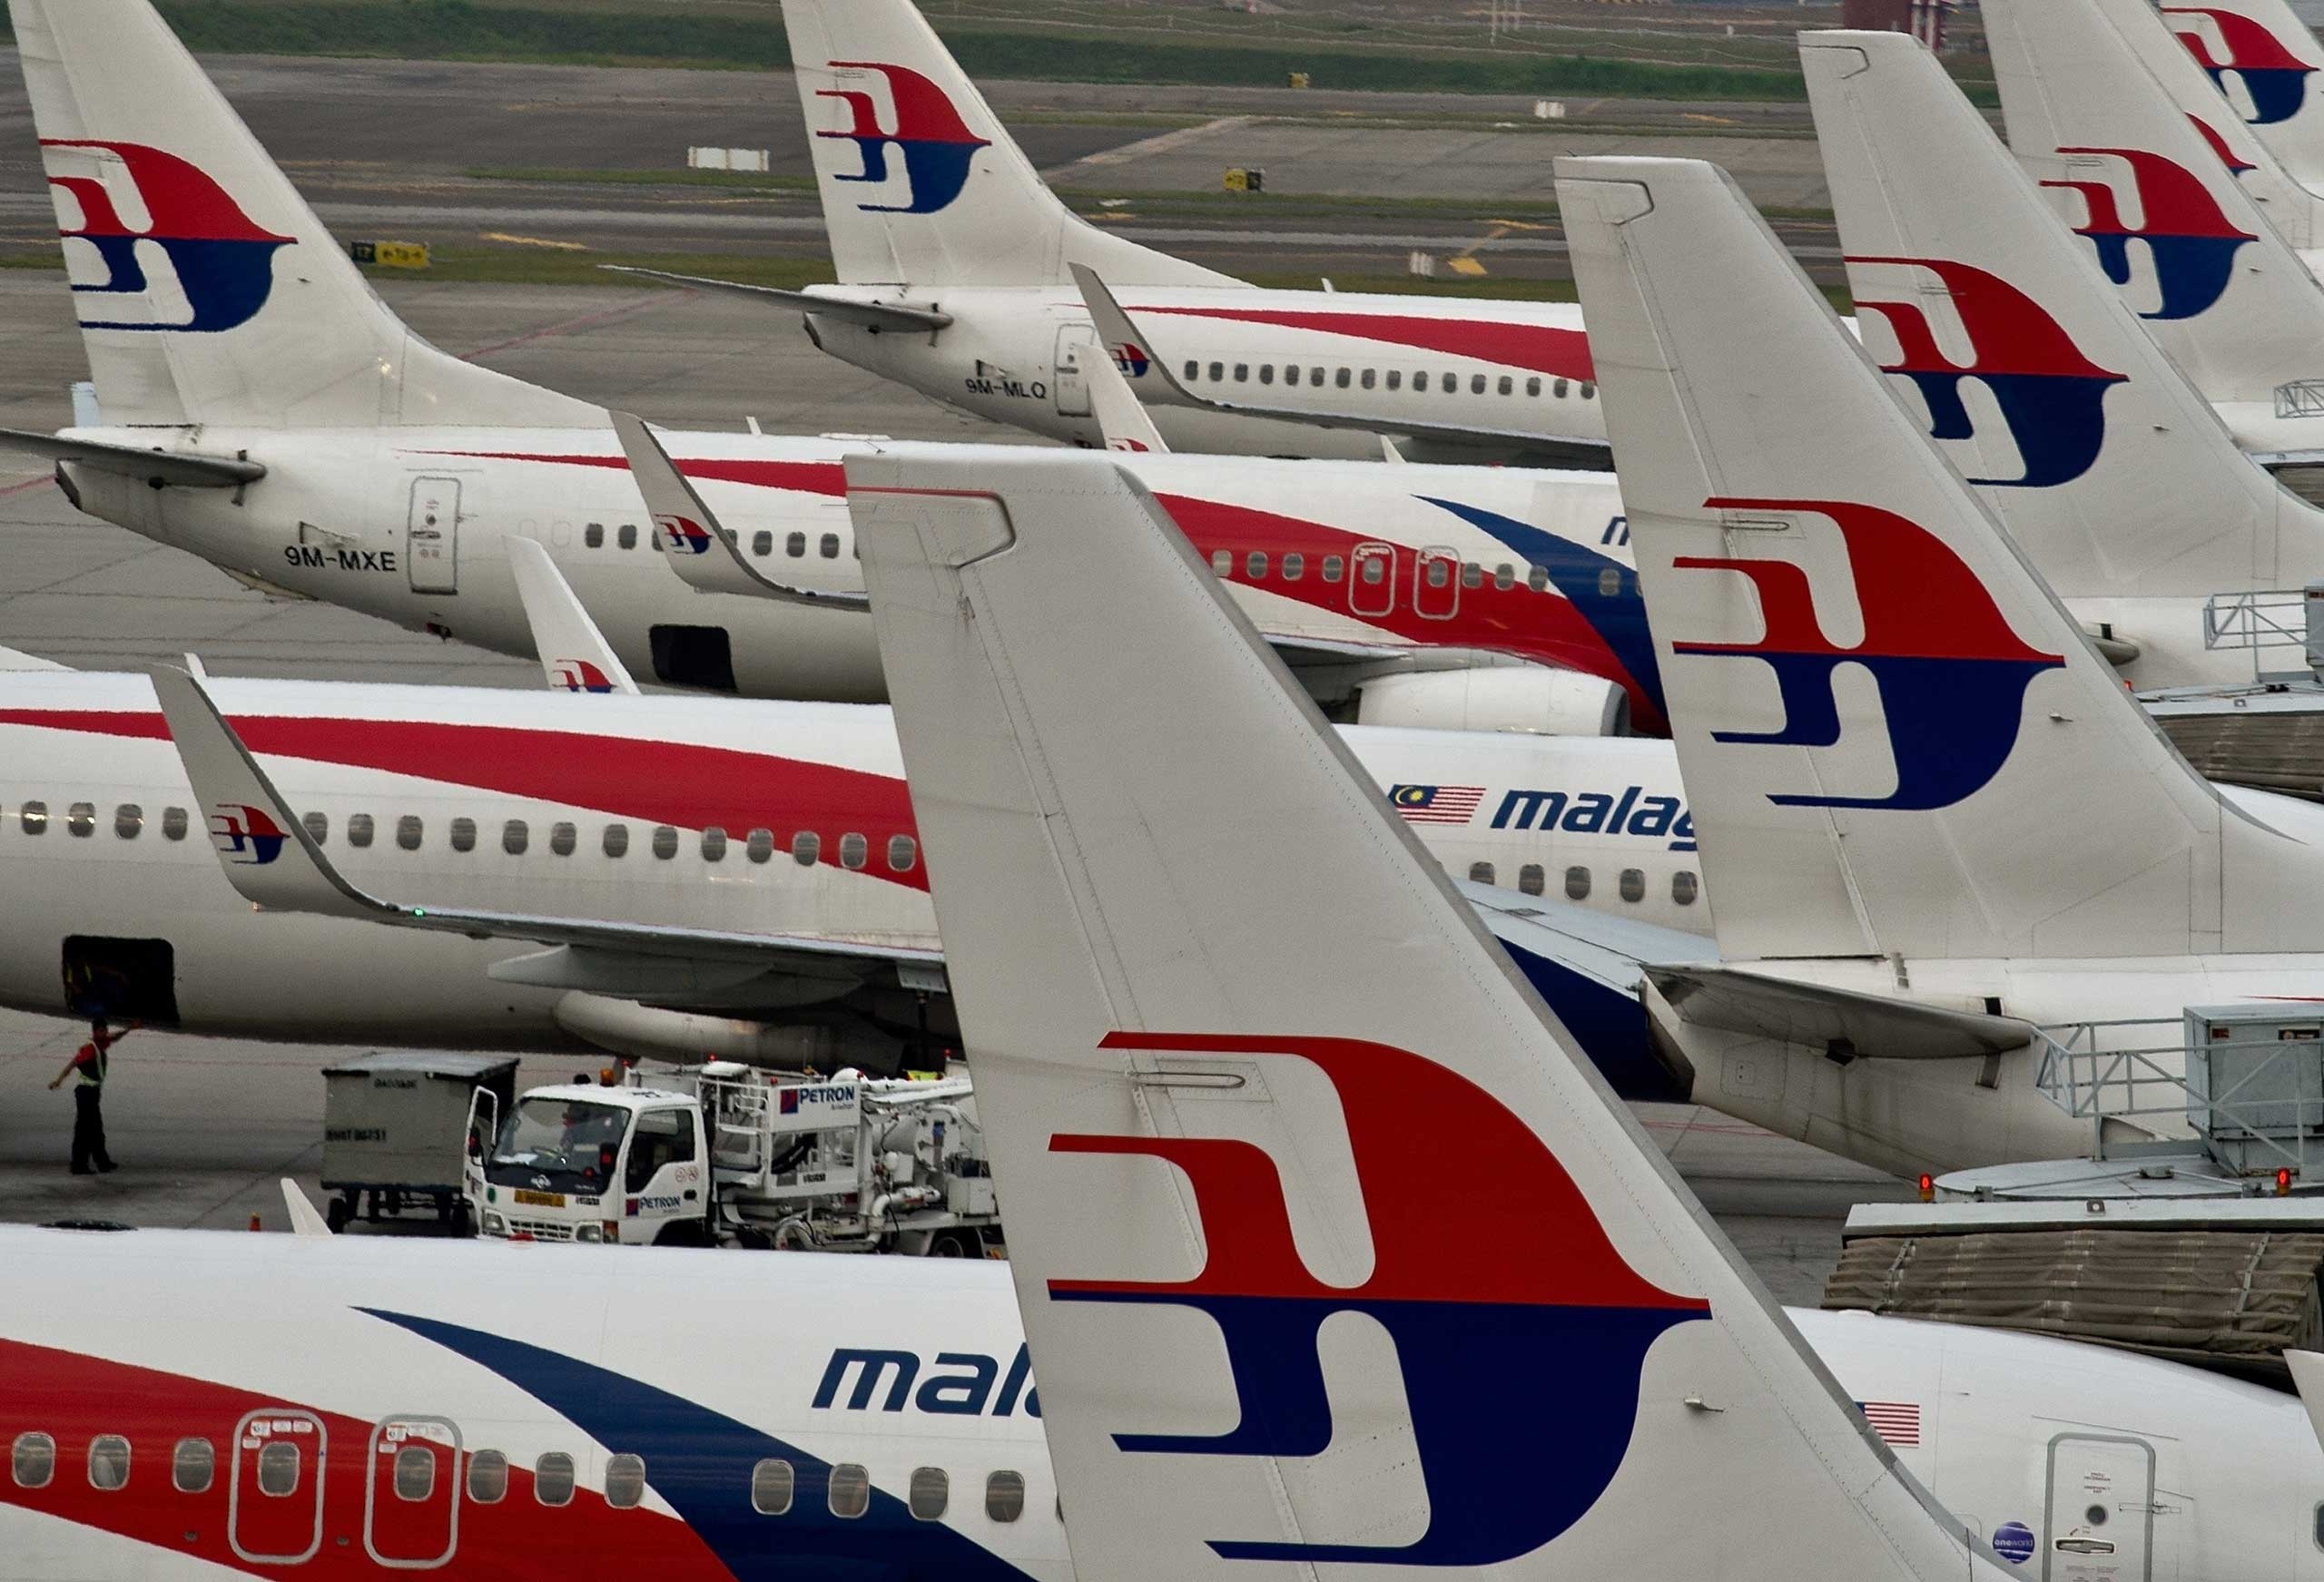 Malaysia Airlines slammed, Insensitive tweet promotion, Time, 2560x1750 HD Desktop